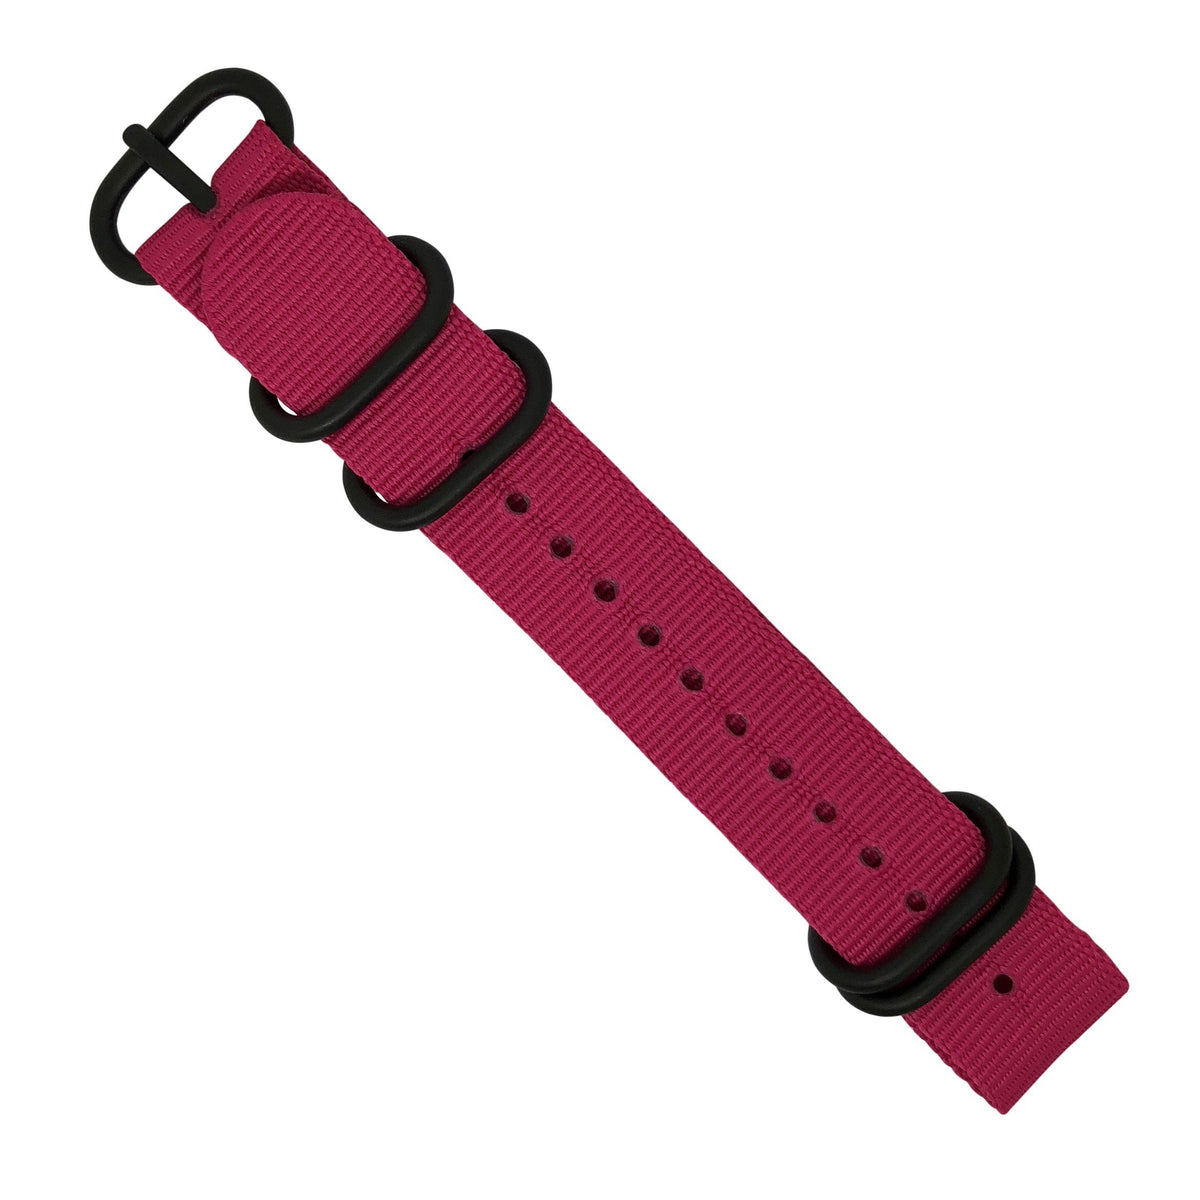 Nylon Zulu Strap in Pink with Black Buckle (22mm) - Nomad Watch Works Malaysia